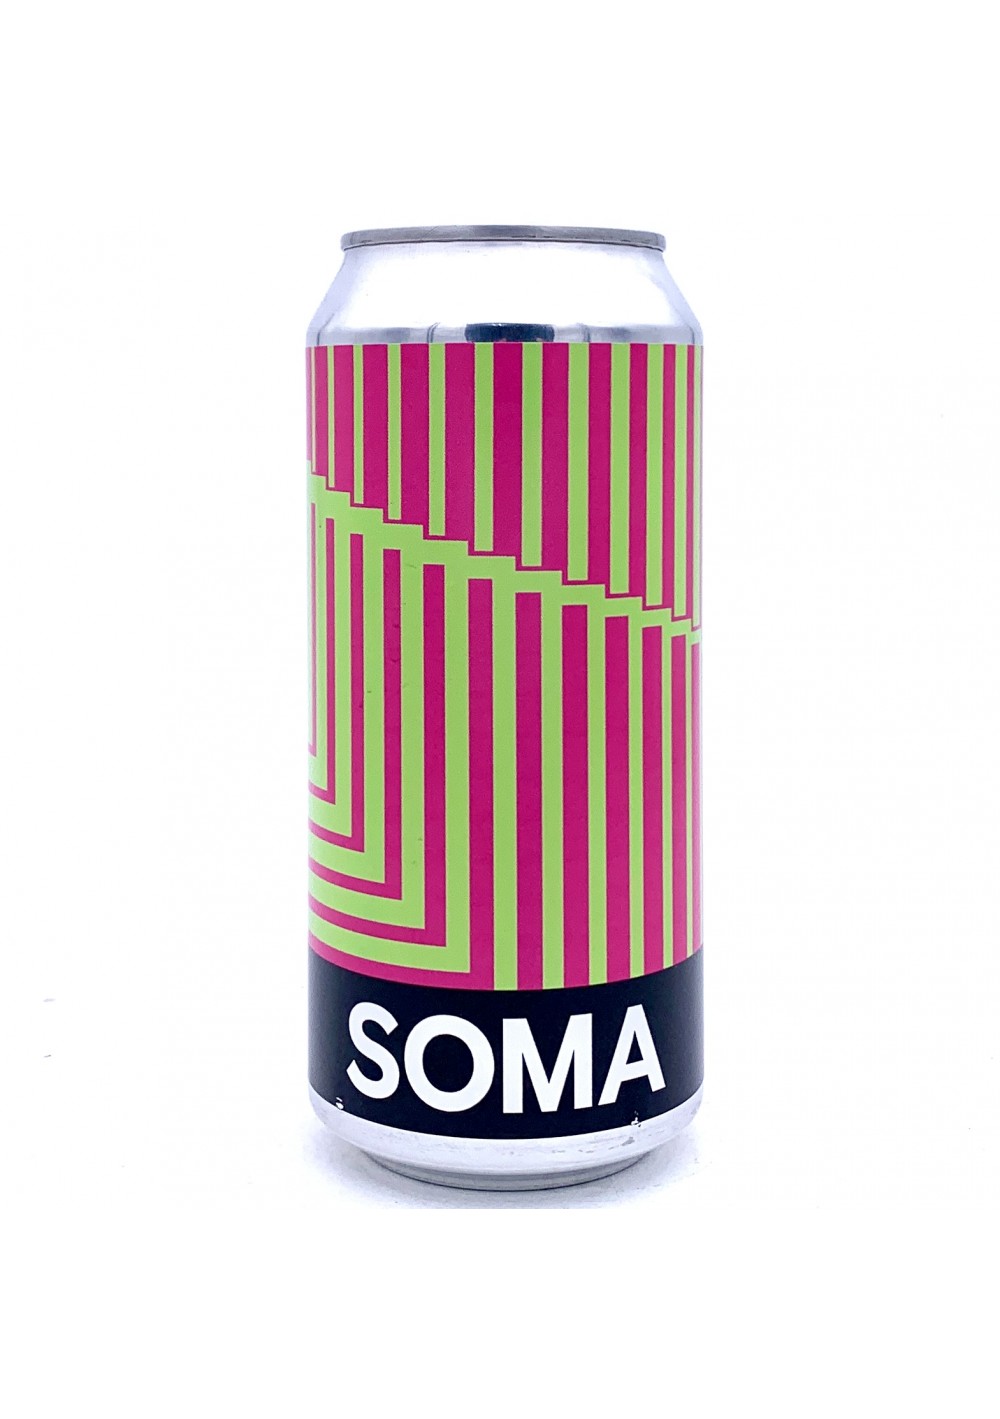 SOMA - Dive In - New England IPA